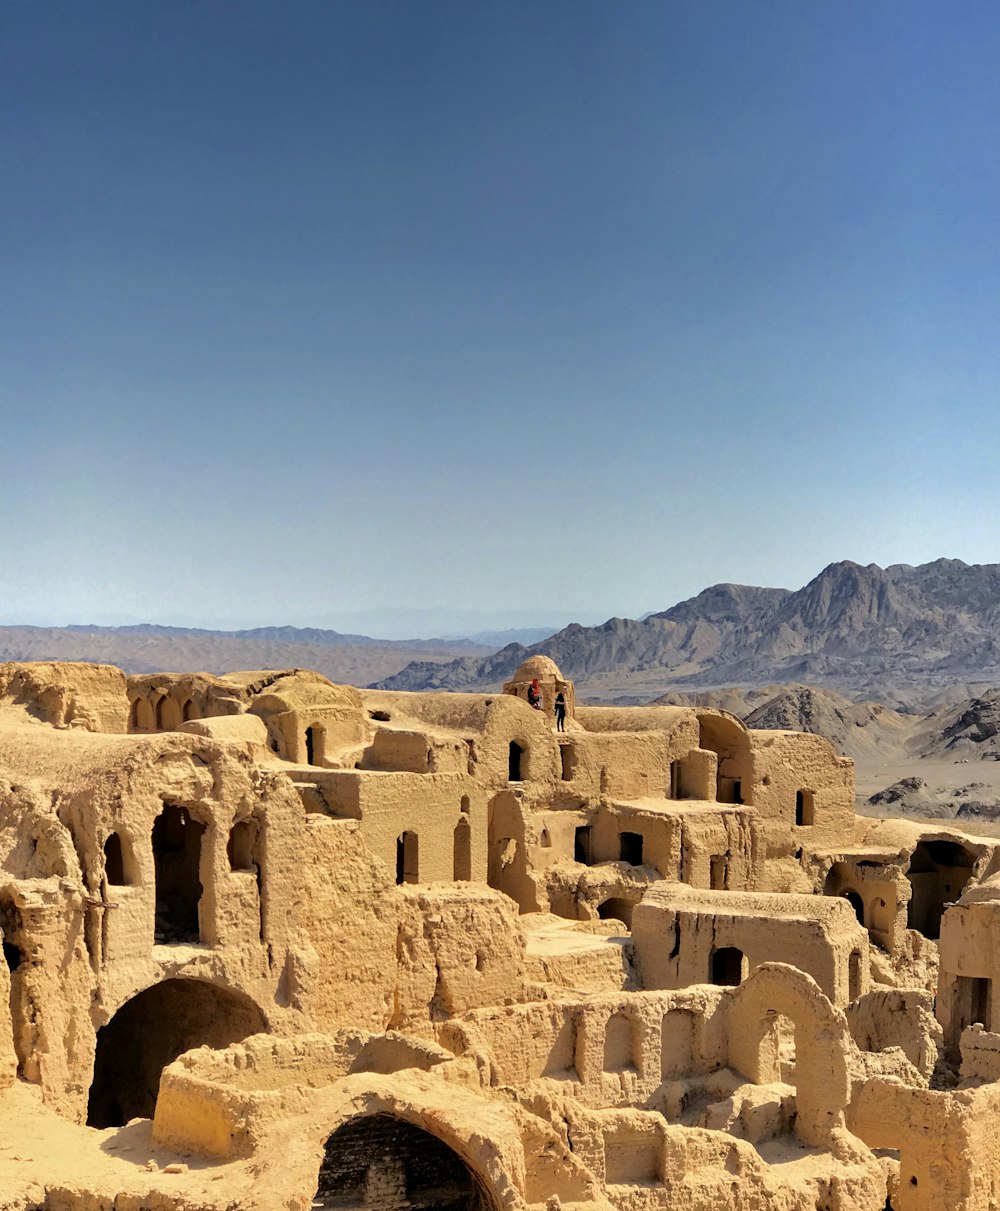 a group of buildings in the desert with mountains in the background